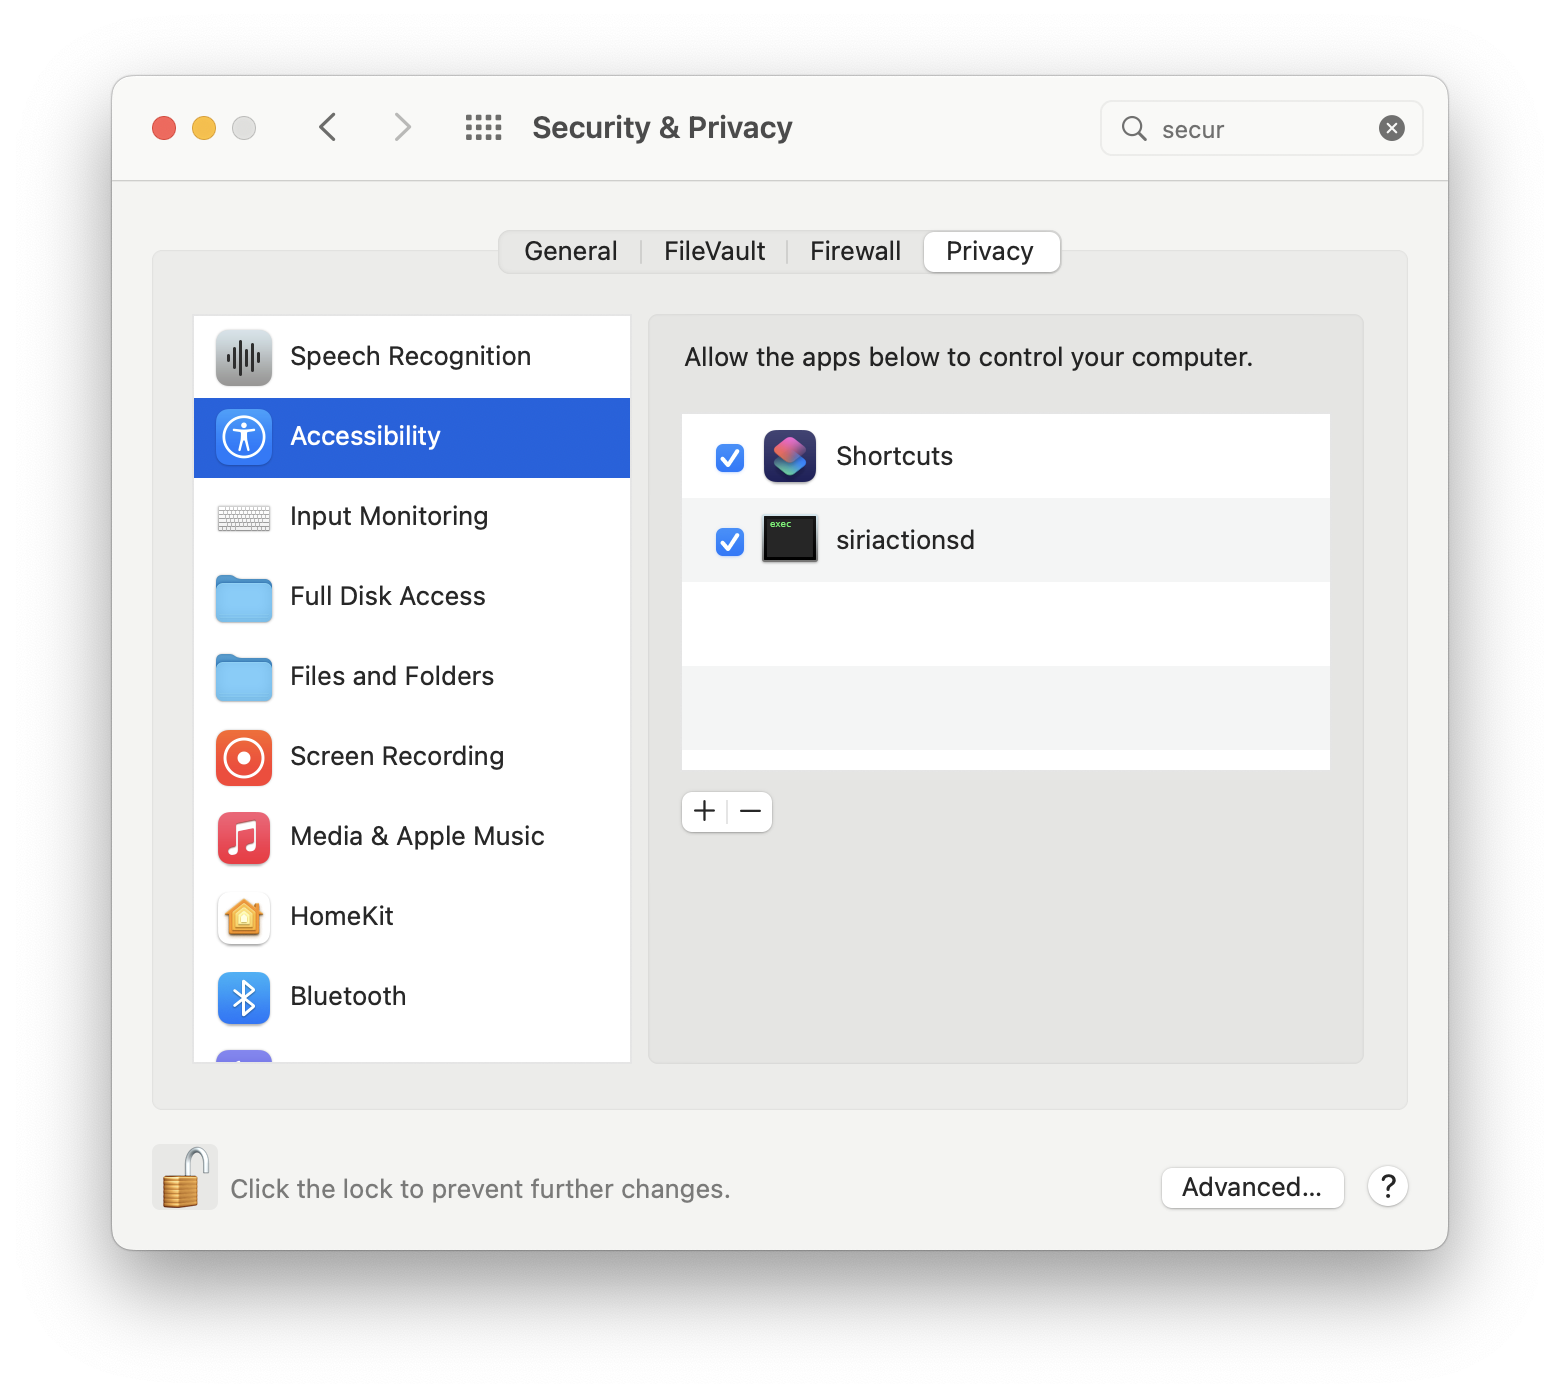 Security & Privacy settings in System Preferences